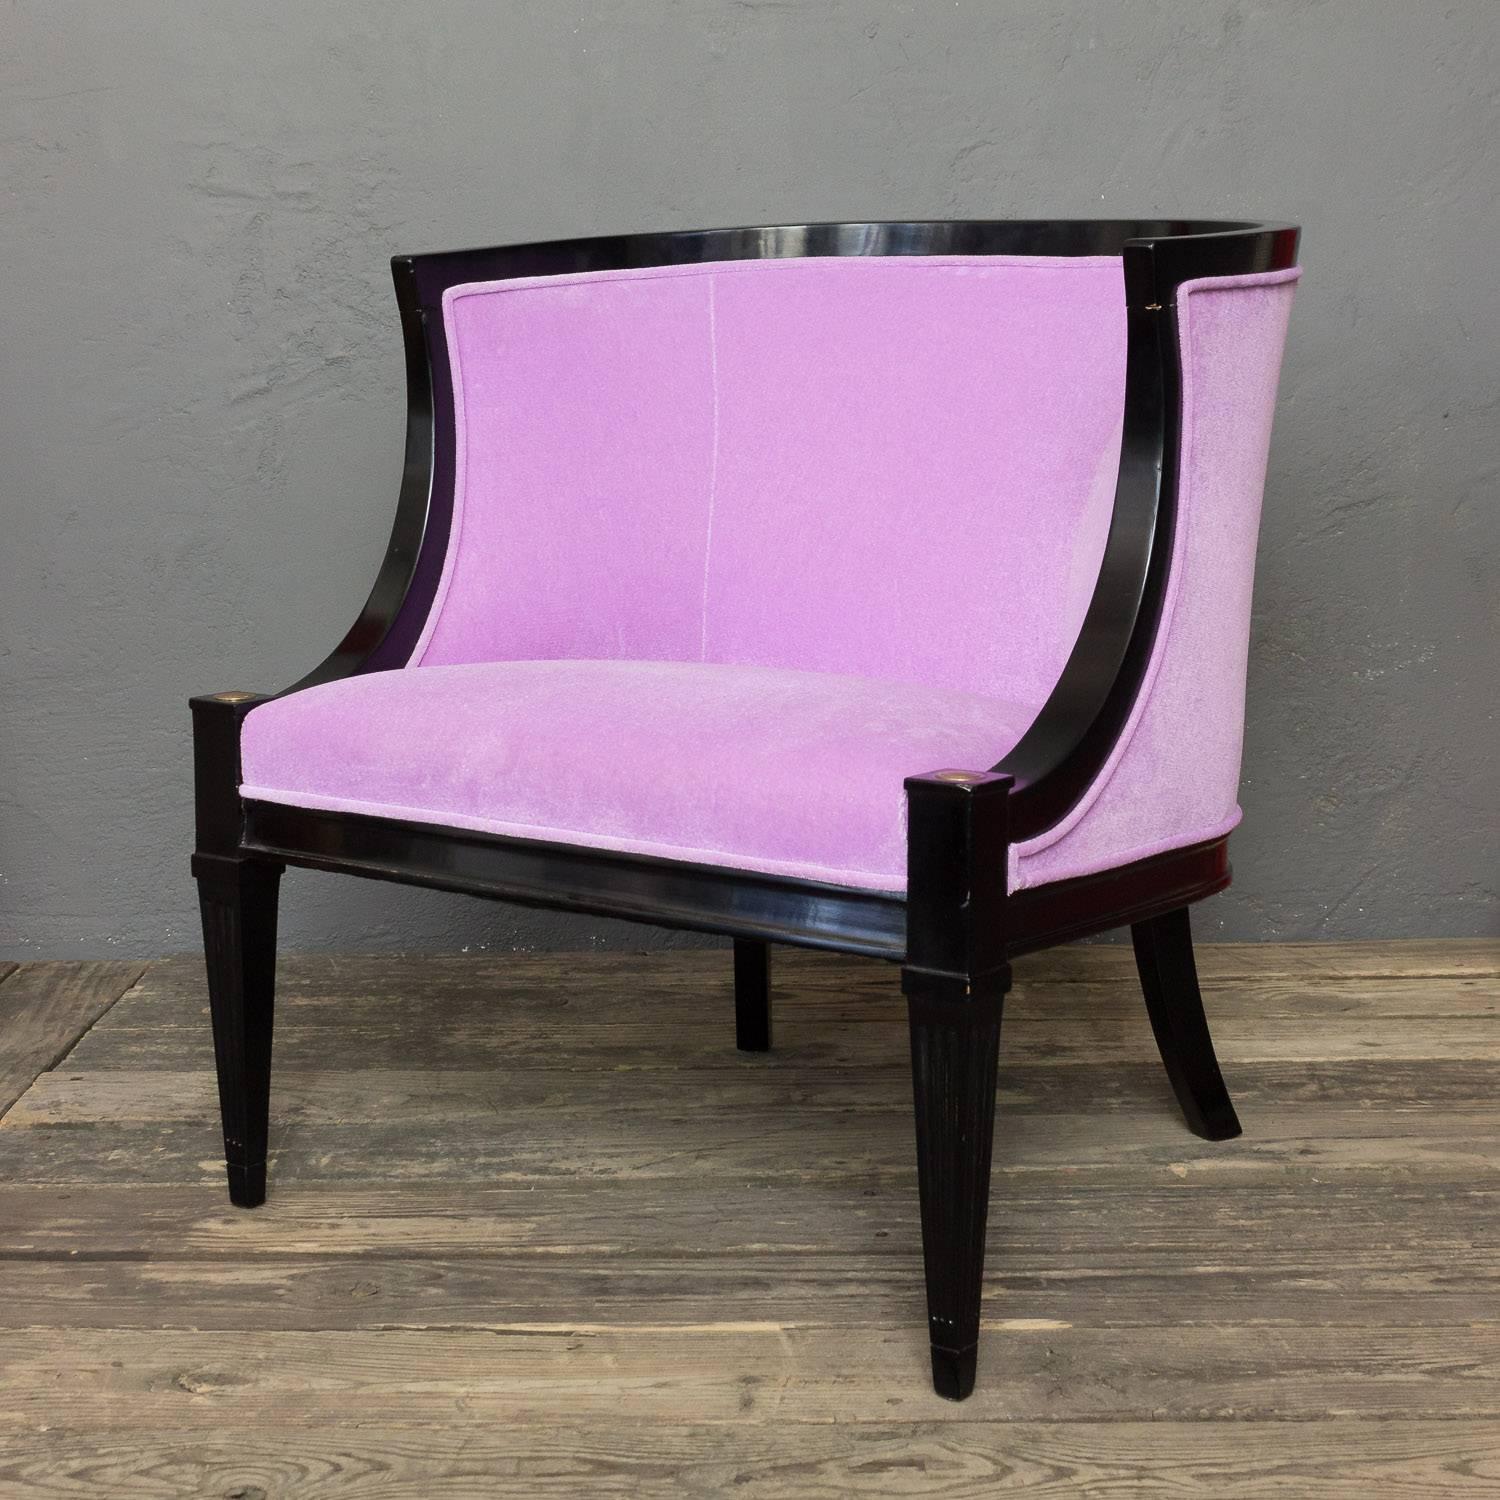 Mid-20th Century Pair of American Mid-Century Modern Rounded Back Armchairs in Purple Velvet For Sale